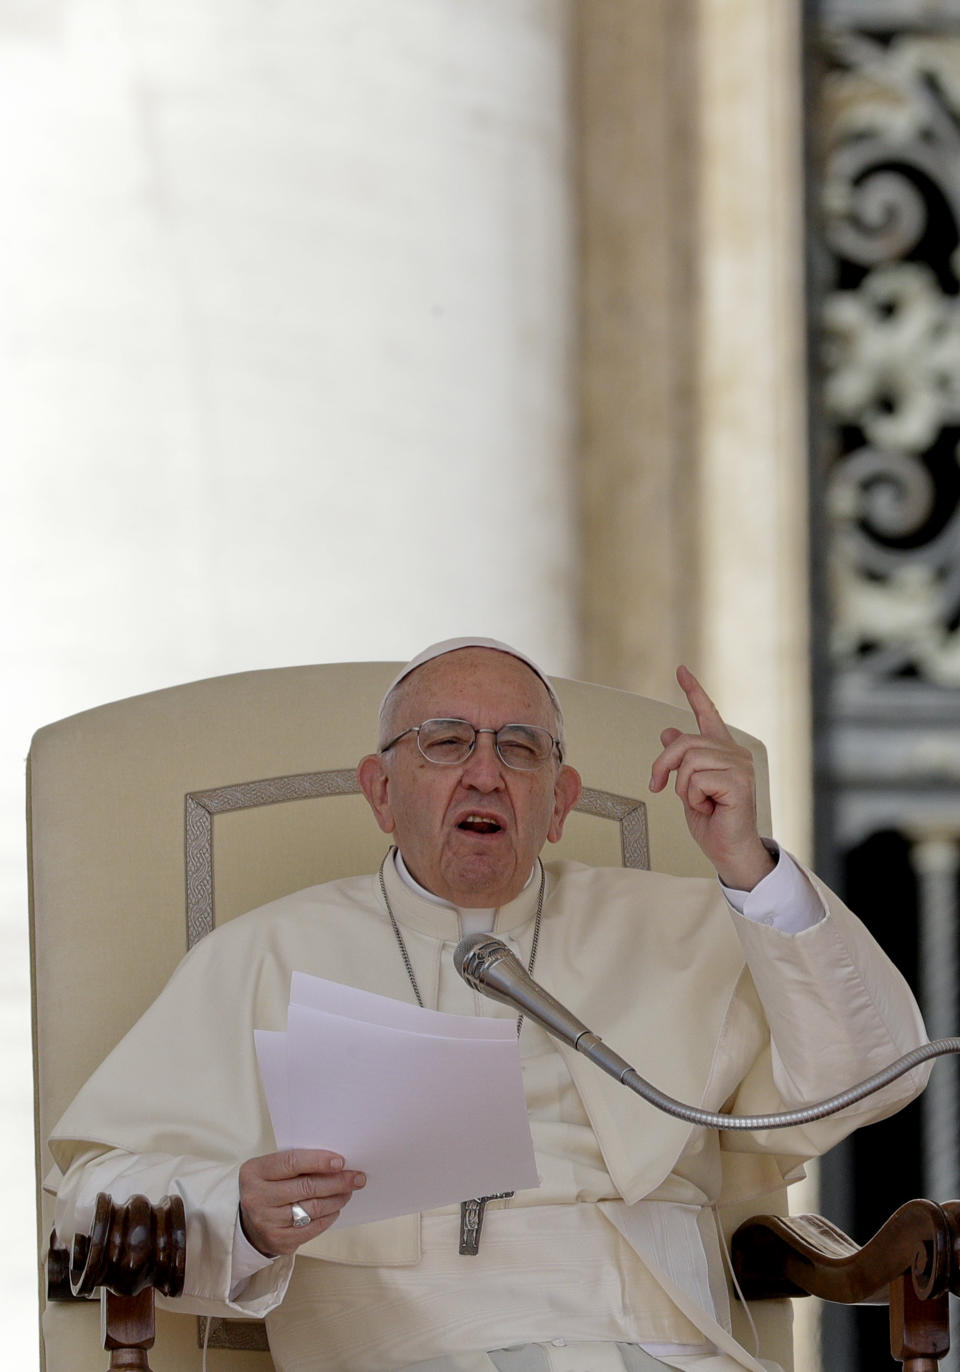 In this Wednesday, April 25, 2018 file photo Pope Francis delivers his speech during his weekly general audience, in St.Peter's Square at the Vatican. The Vatican said Thursday Aug. 2, 2018 that Pope Francis had changed the Catechism of the Catholic Church about the death penalty, saying it can never be sanctioned because it "attacks" the inherent dignity of all humans. (AP Photo/Andrew Medichini, file)